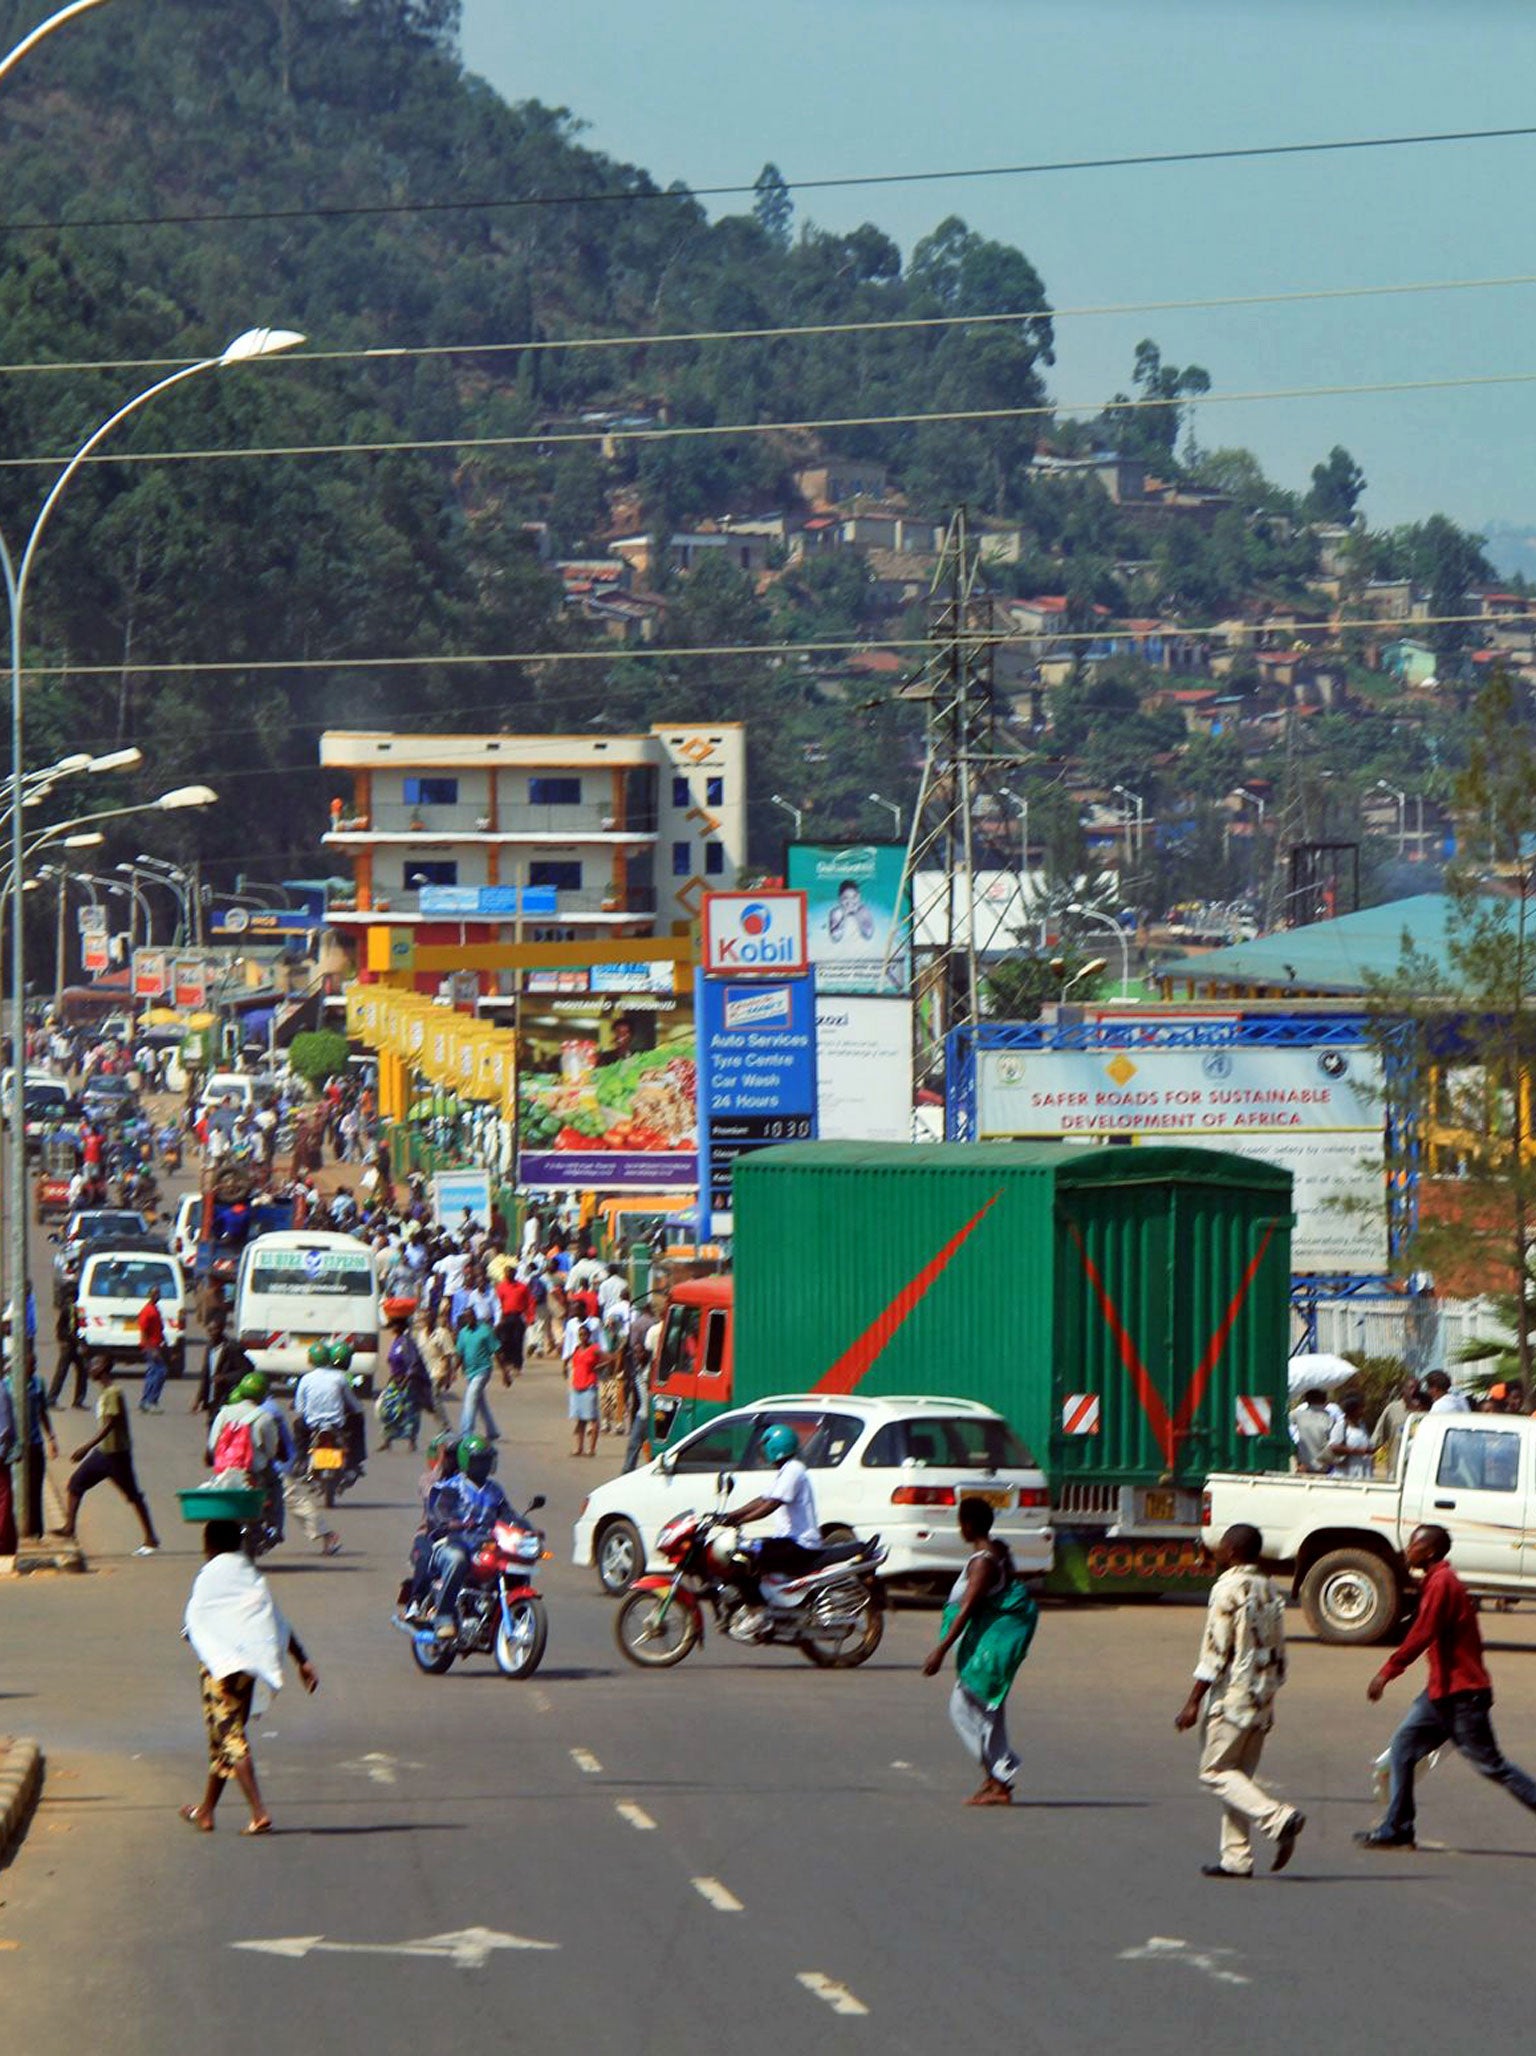 In the fast lane: the pace of Rwanda's growing economy is evident in the busy capital Kigali